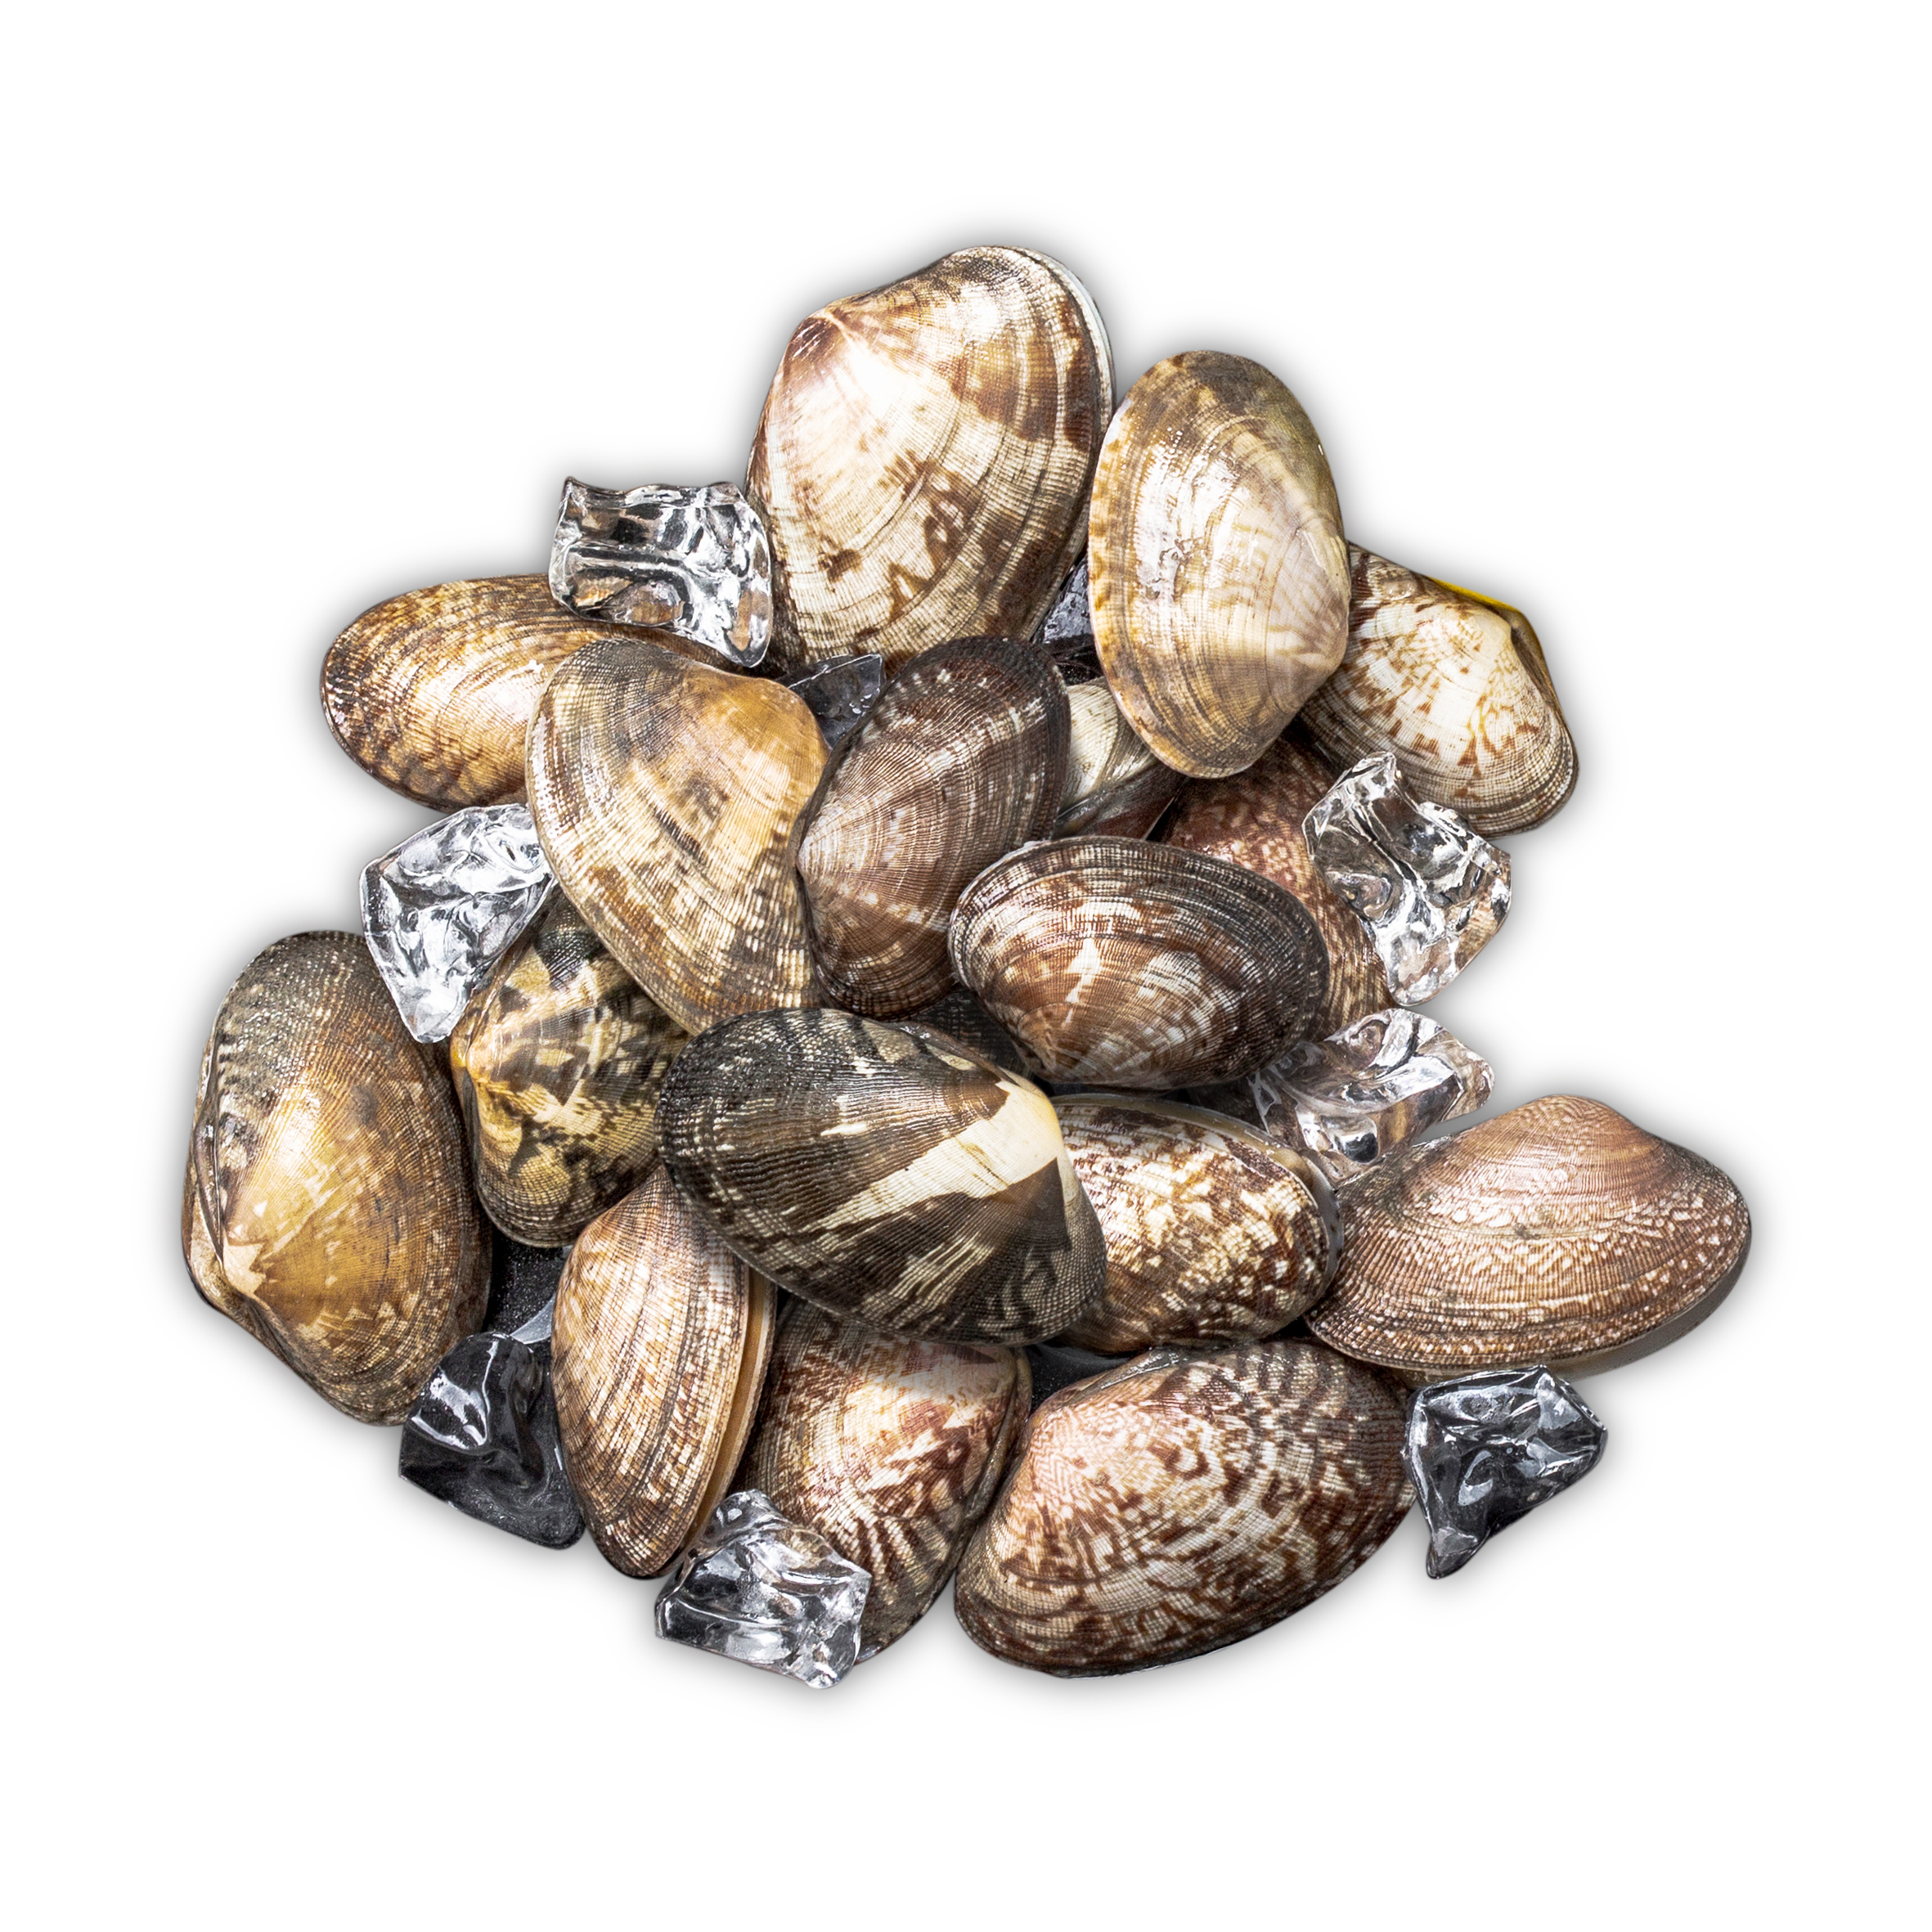 Reasonable price for Apo Fillet Supplier - clam – Makefood Featured Image